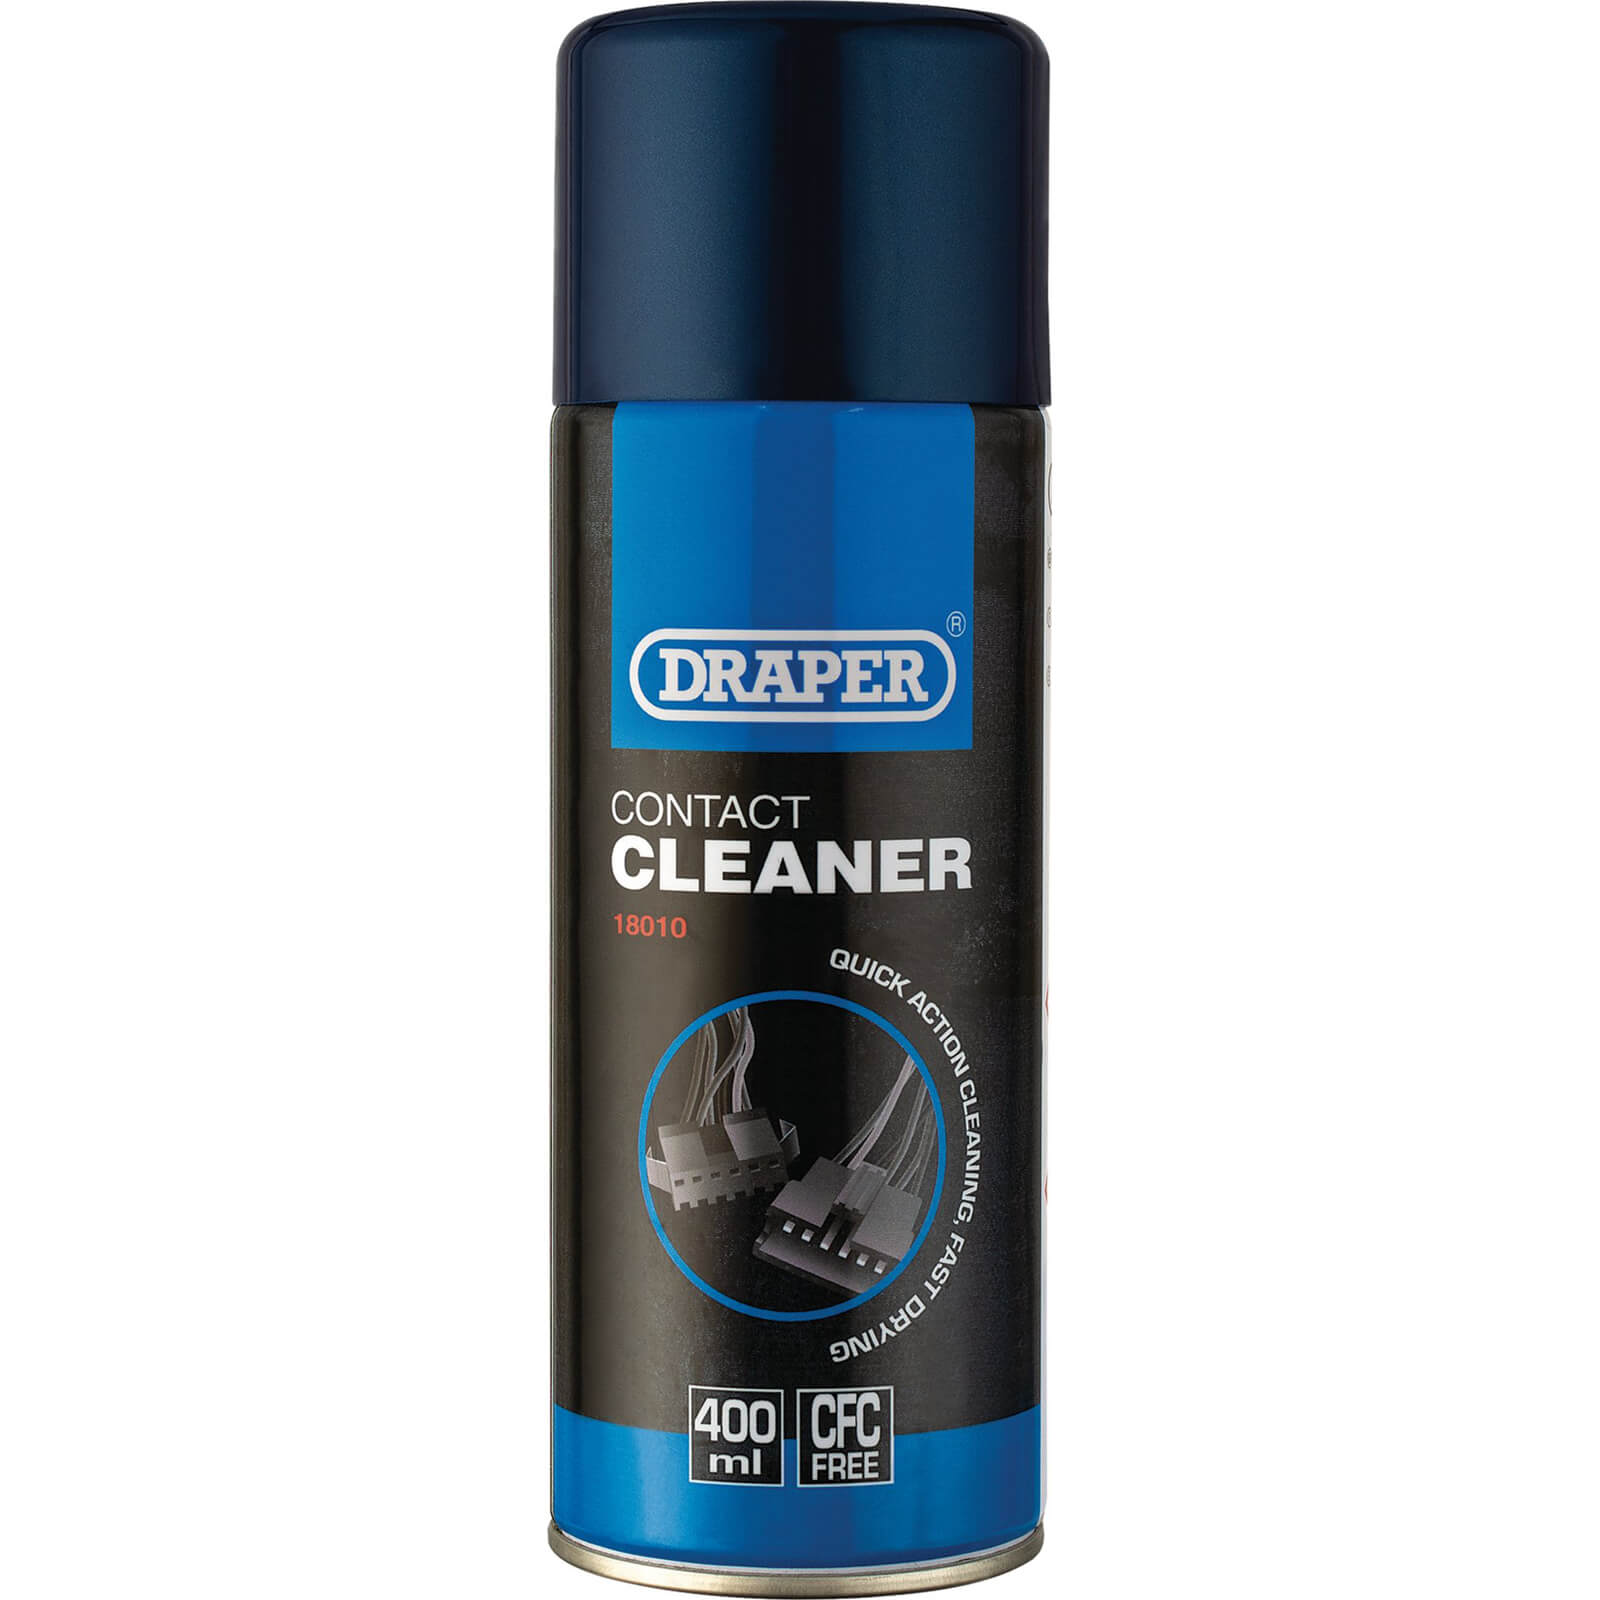 Image of Draper Contact Cleaner, 400ml